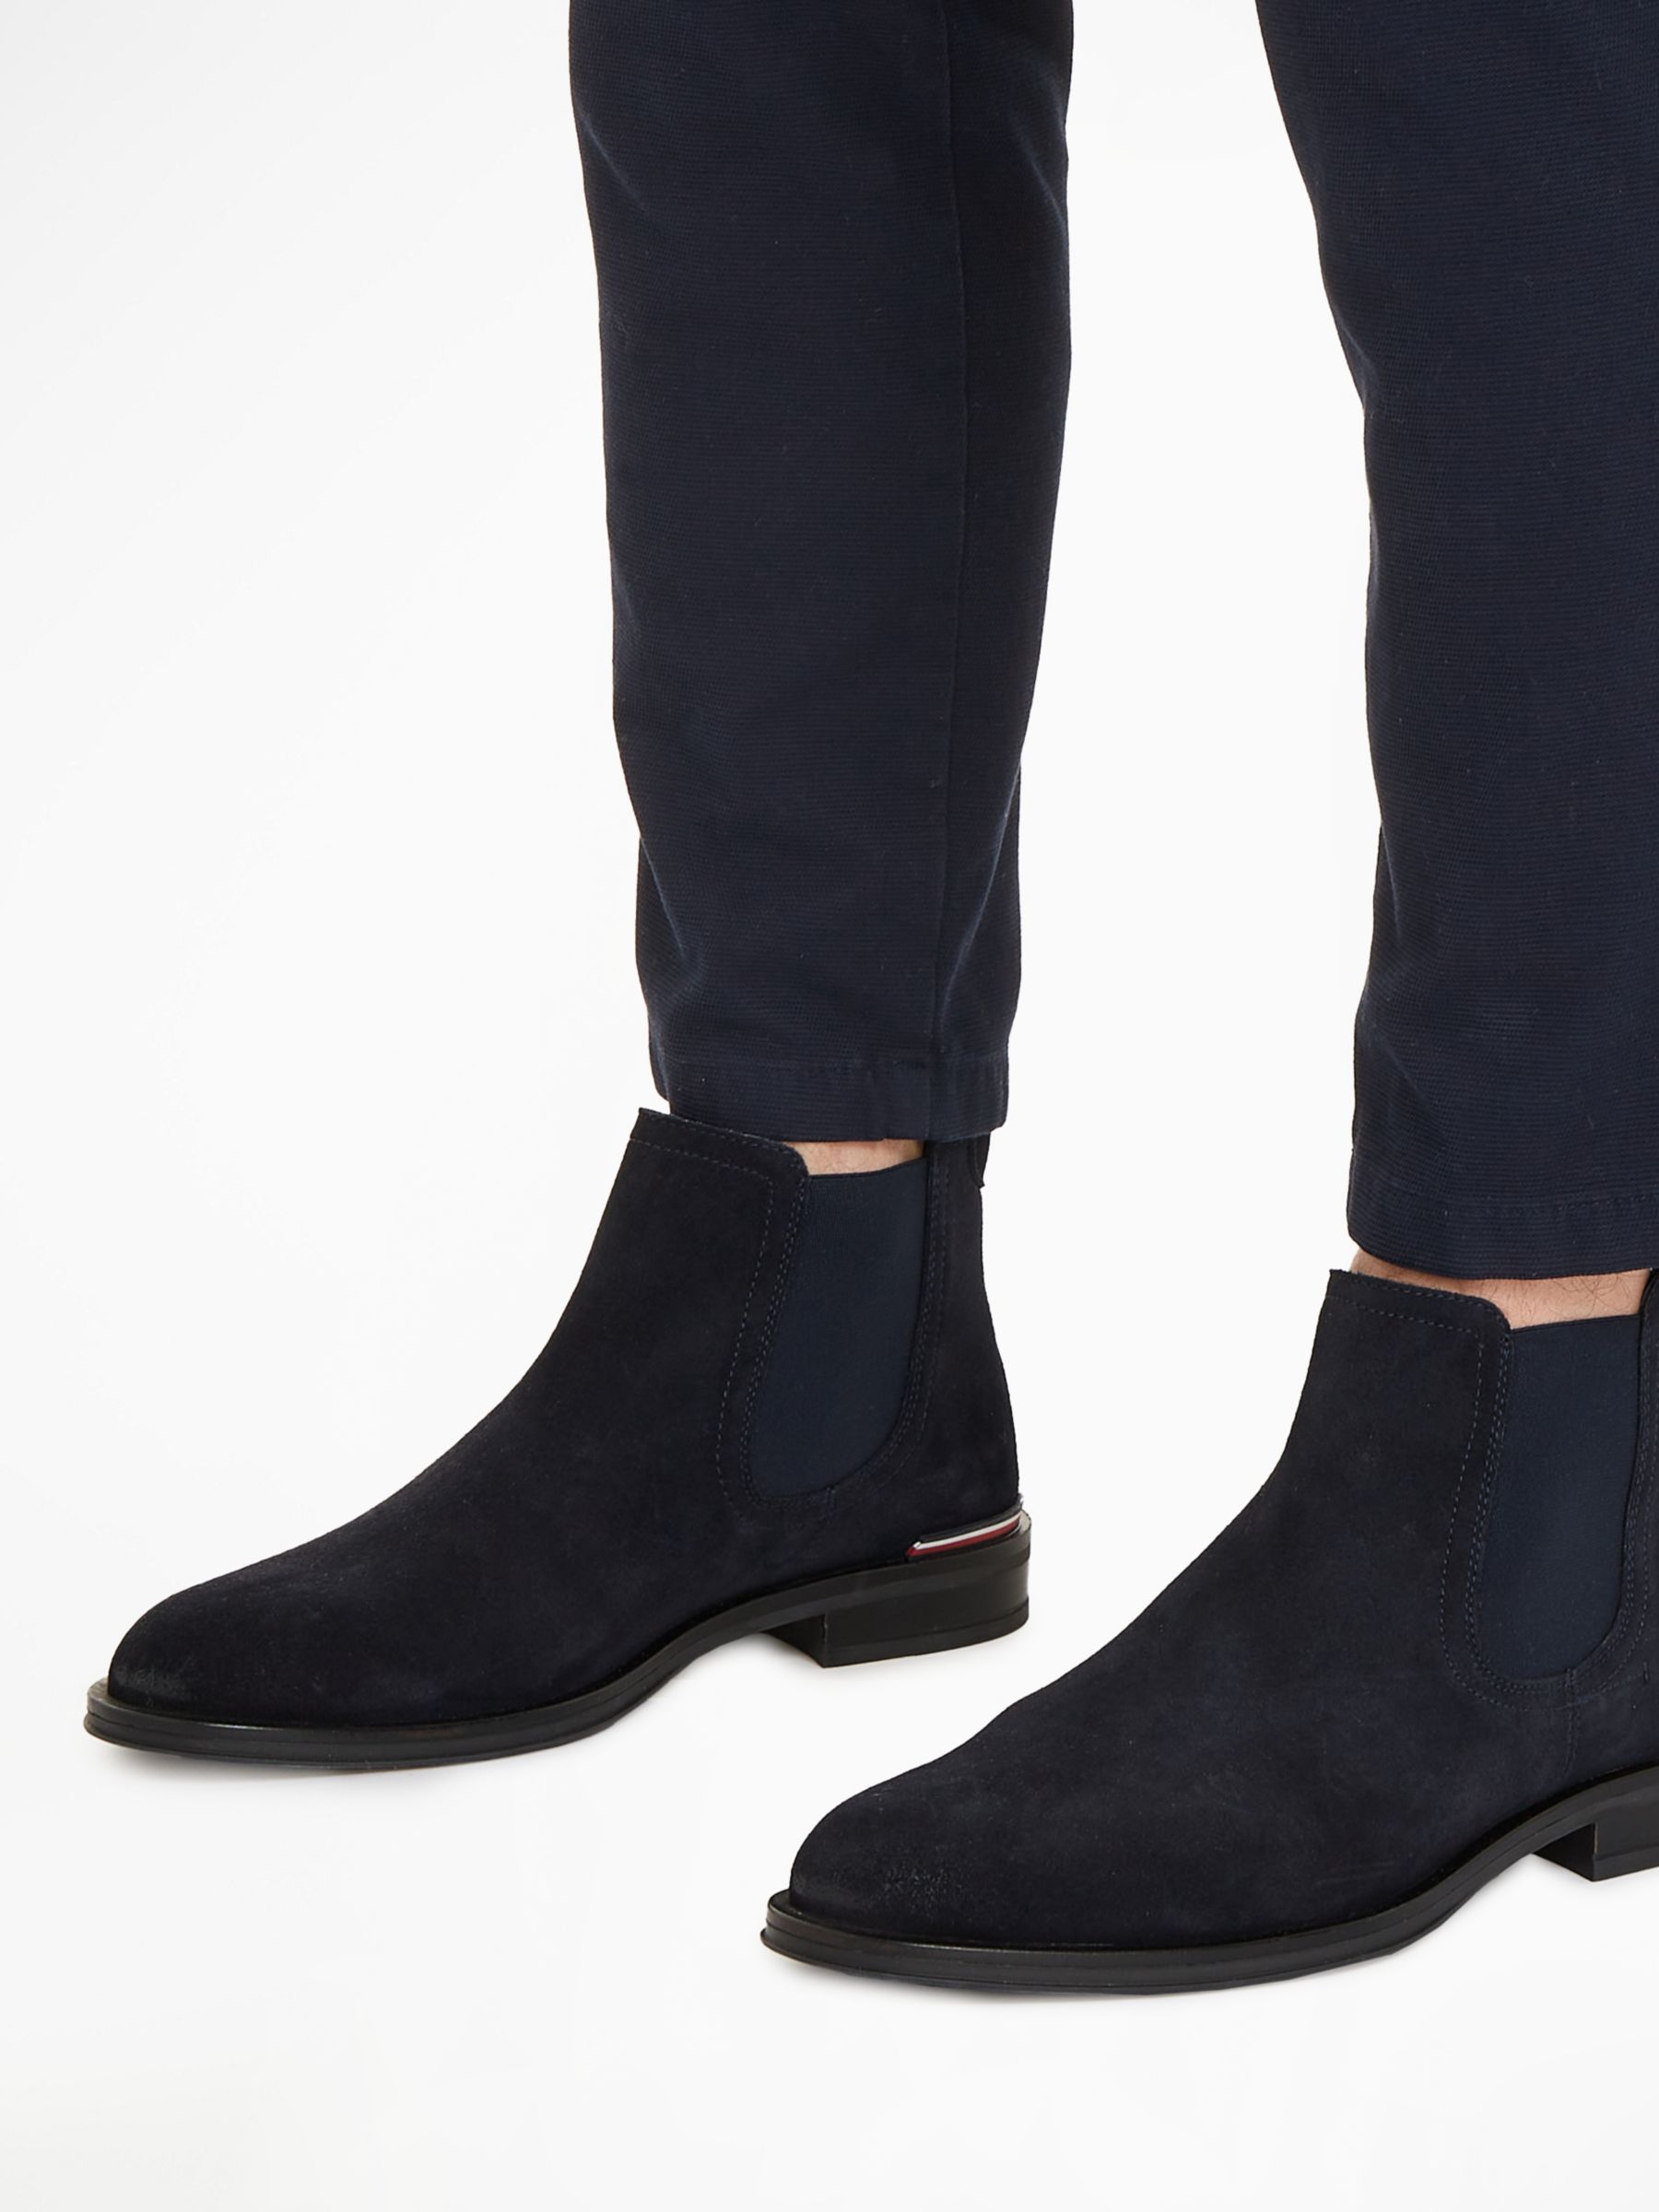 Tommy Hilfiger Suede Chelsea Boots, Navy, EU41